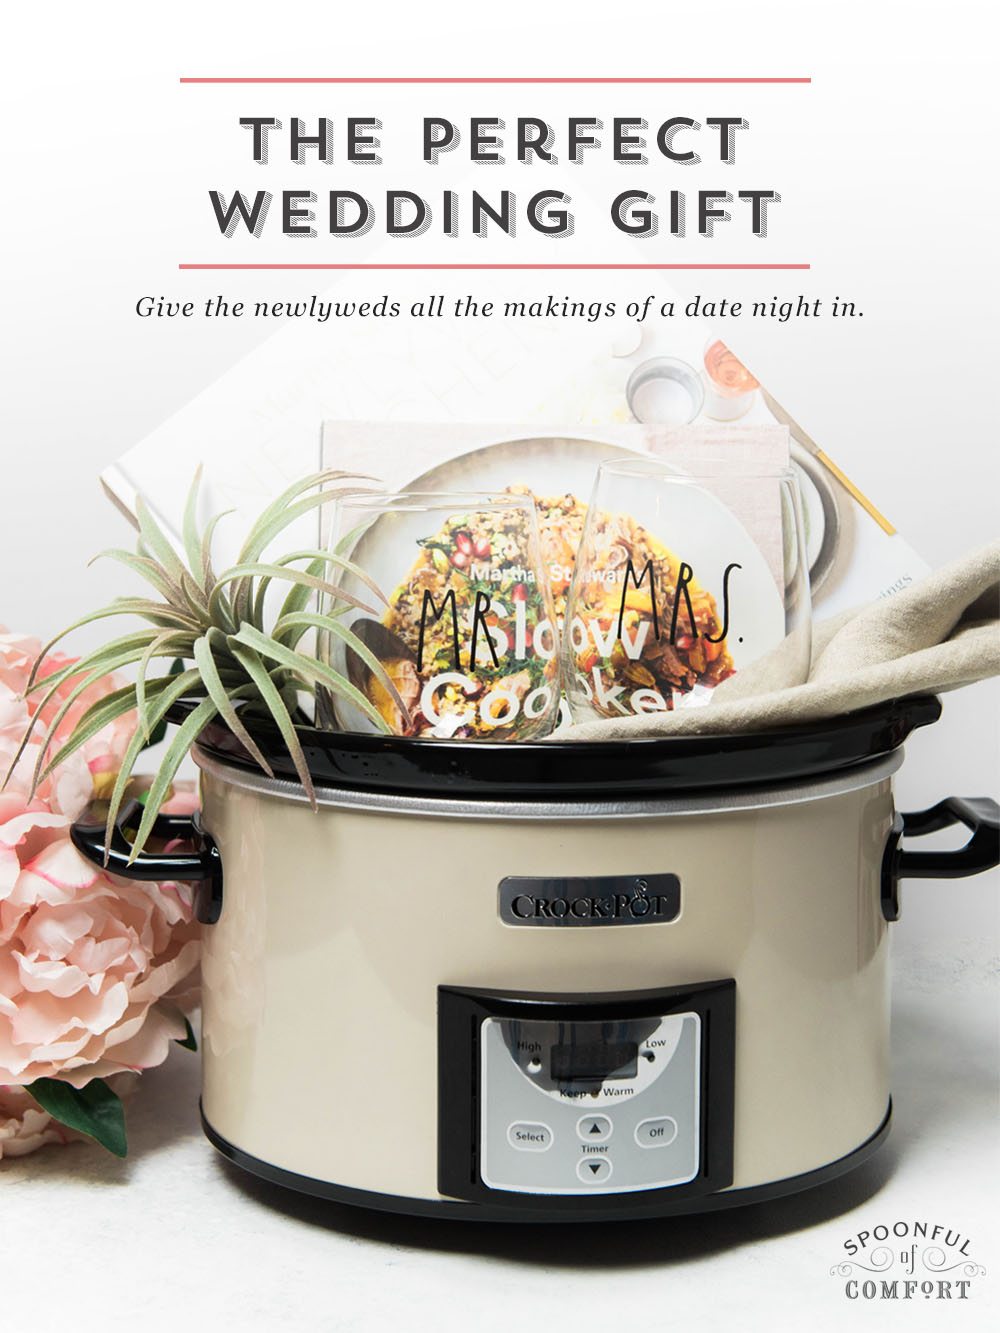 Wedding Gifts All Newlyweds Will Love